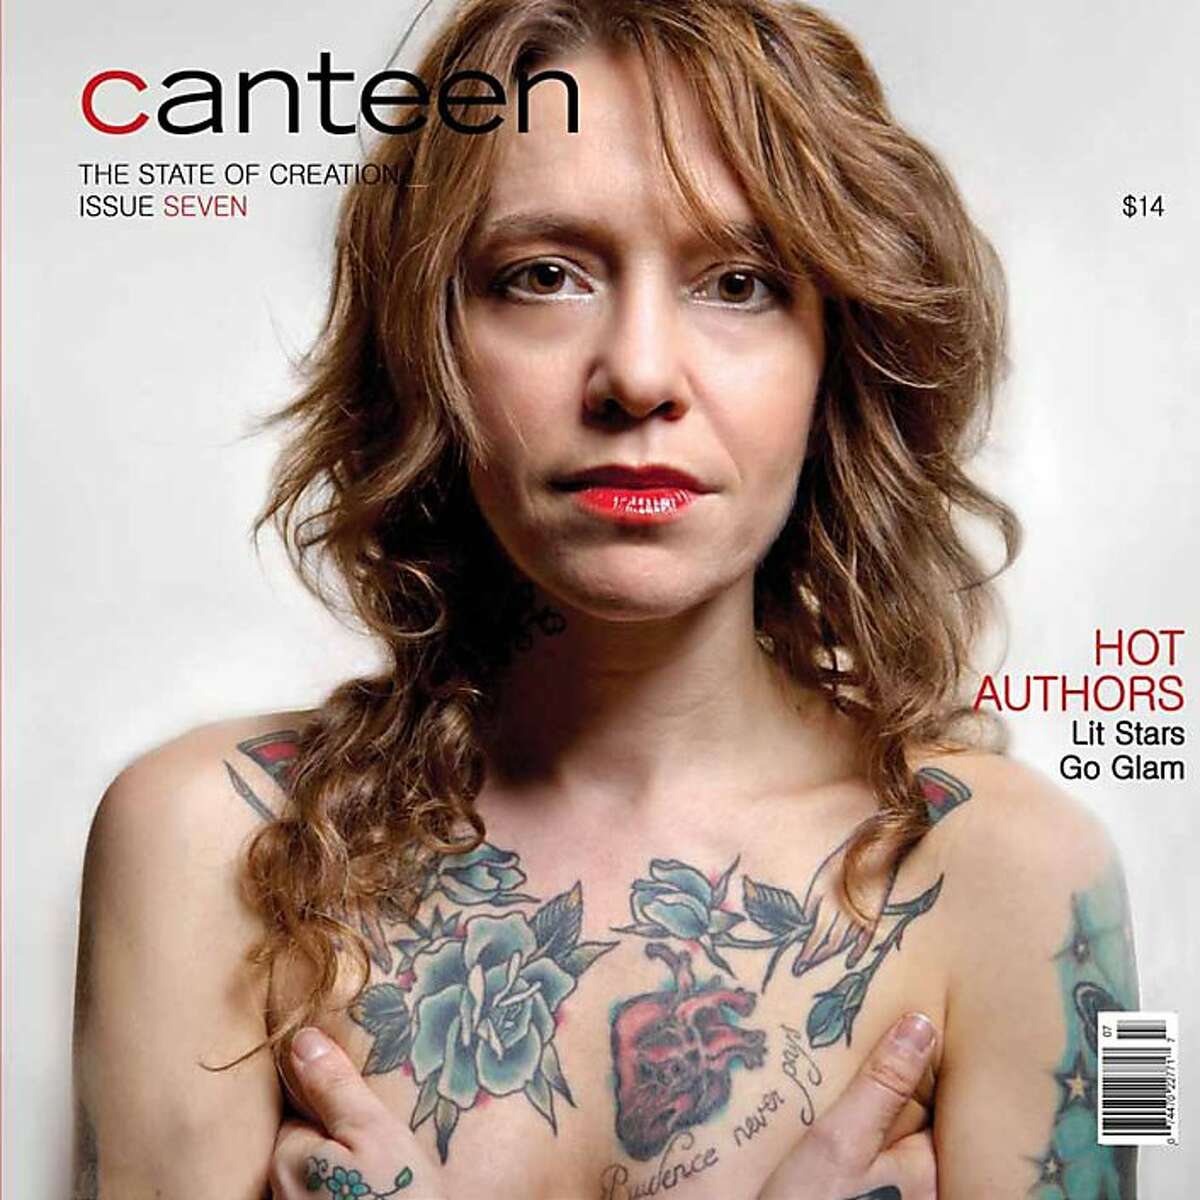 San Francisco author Michelle Tea is featured on the cover of Canteen's seventh issue.